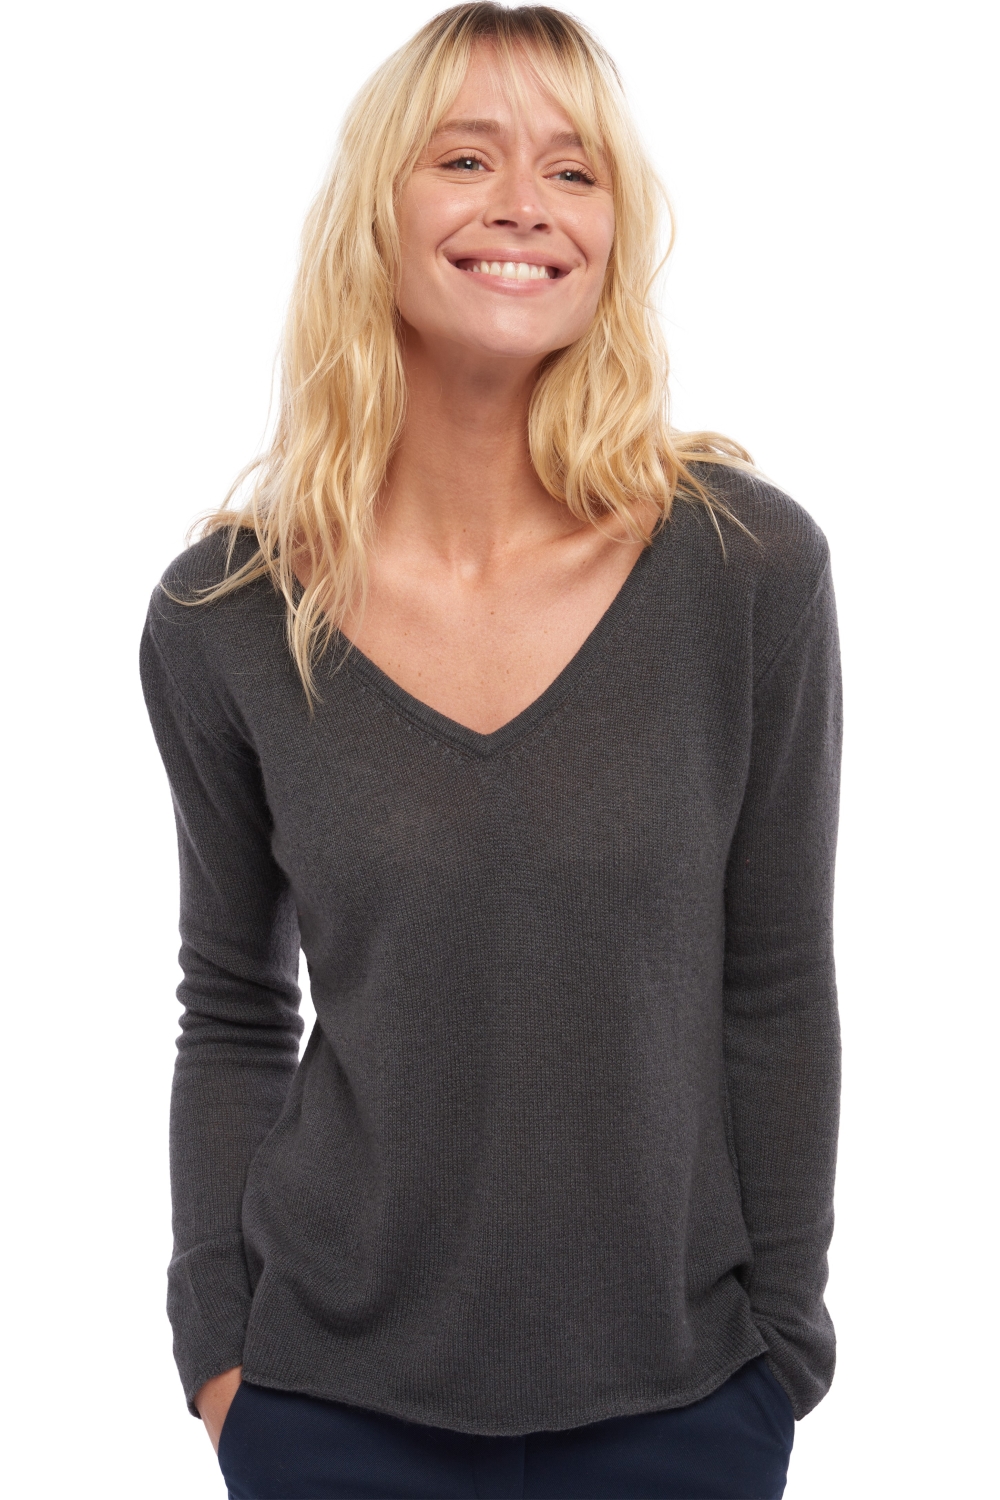 Cashmere ladies basic sweaters at low prices flavie matt charcoal 3xl